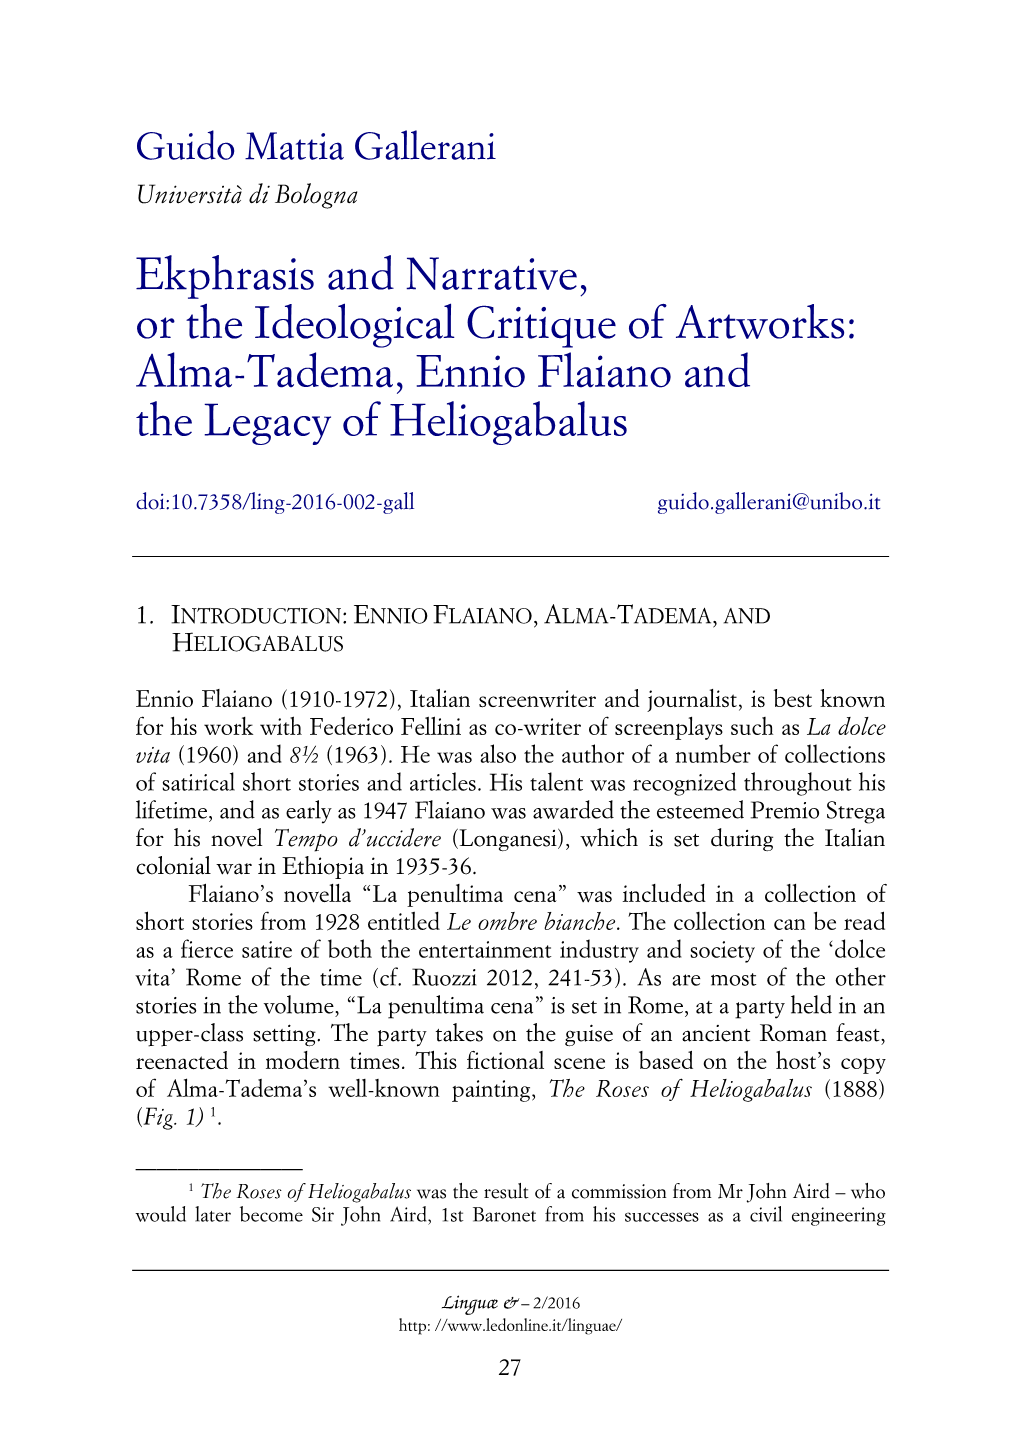 Ekphrasis and Narrative, Or the Ideological Critique of Artworks: Alma-Tadema, Ennio Flaiano and the Legacy of Heliogabalus